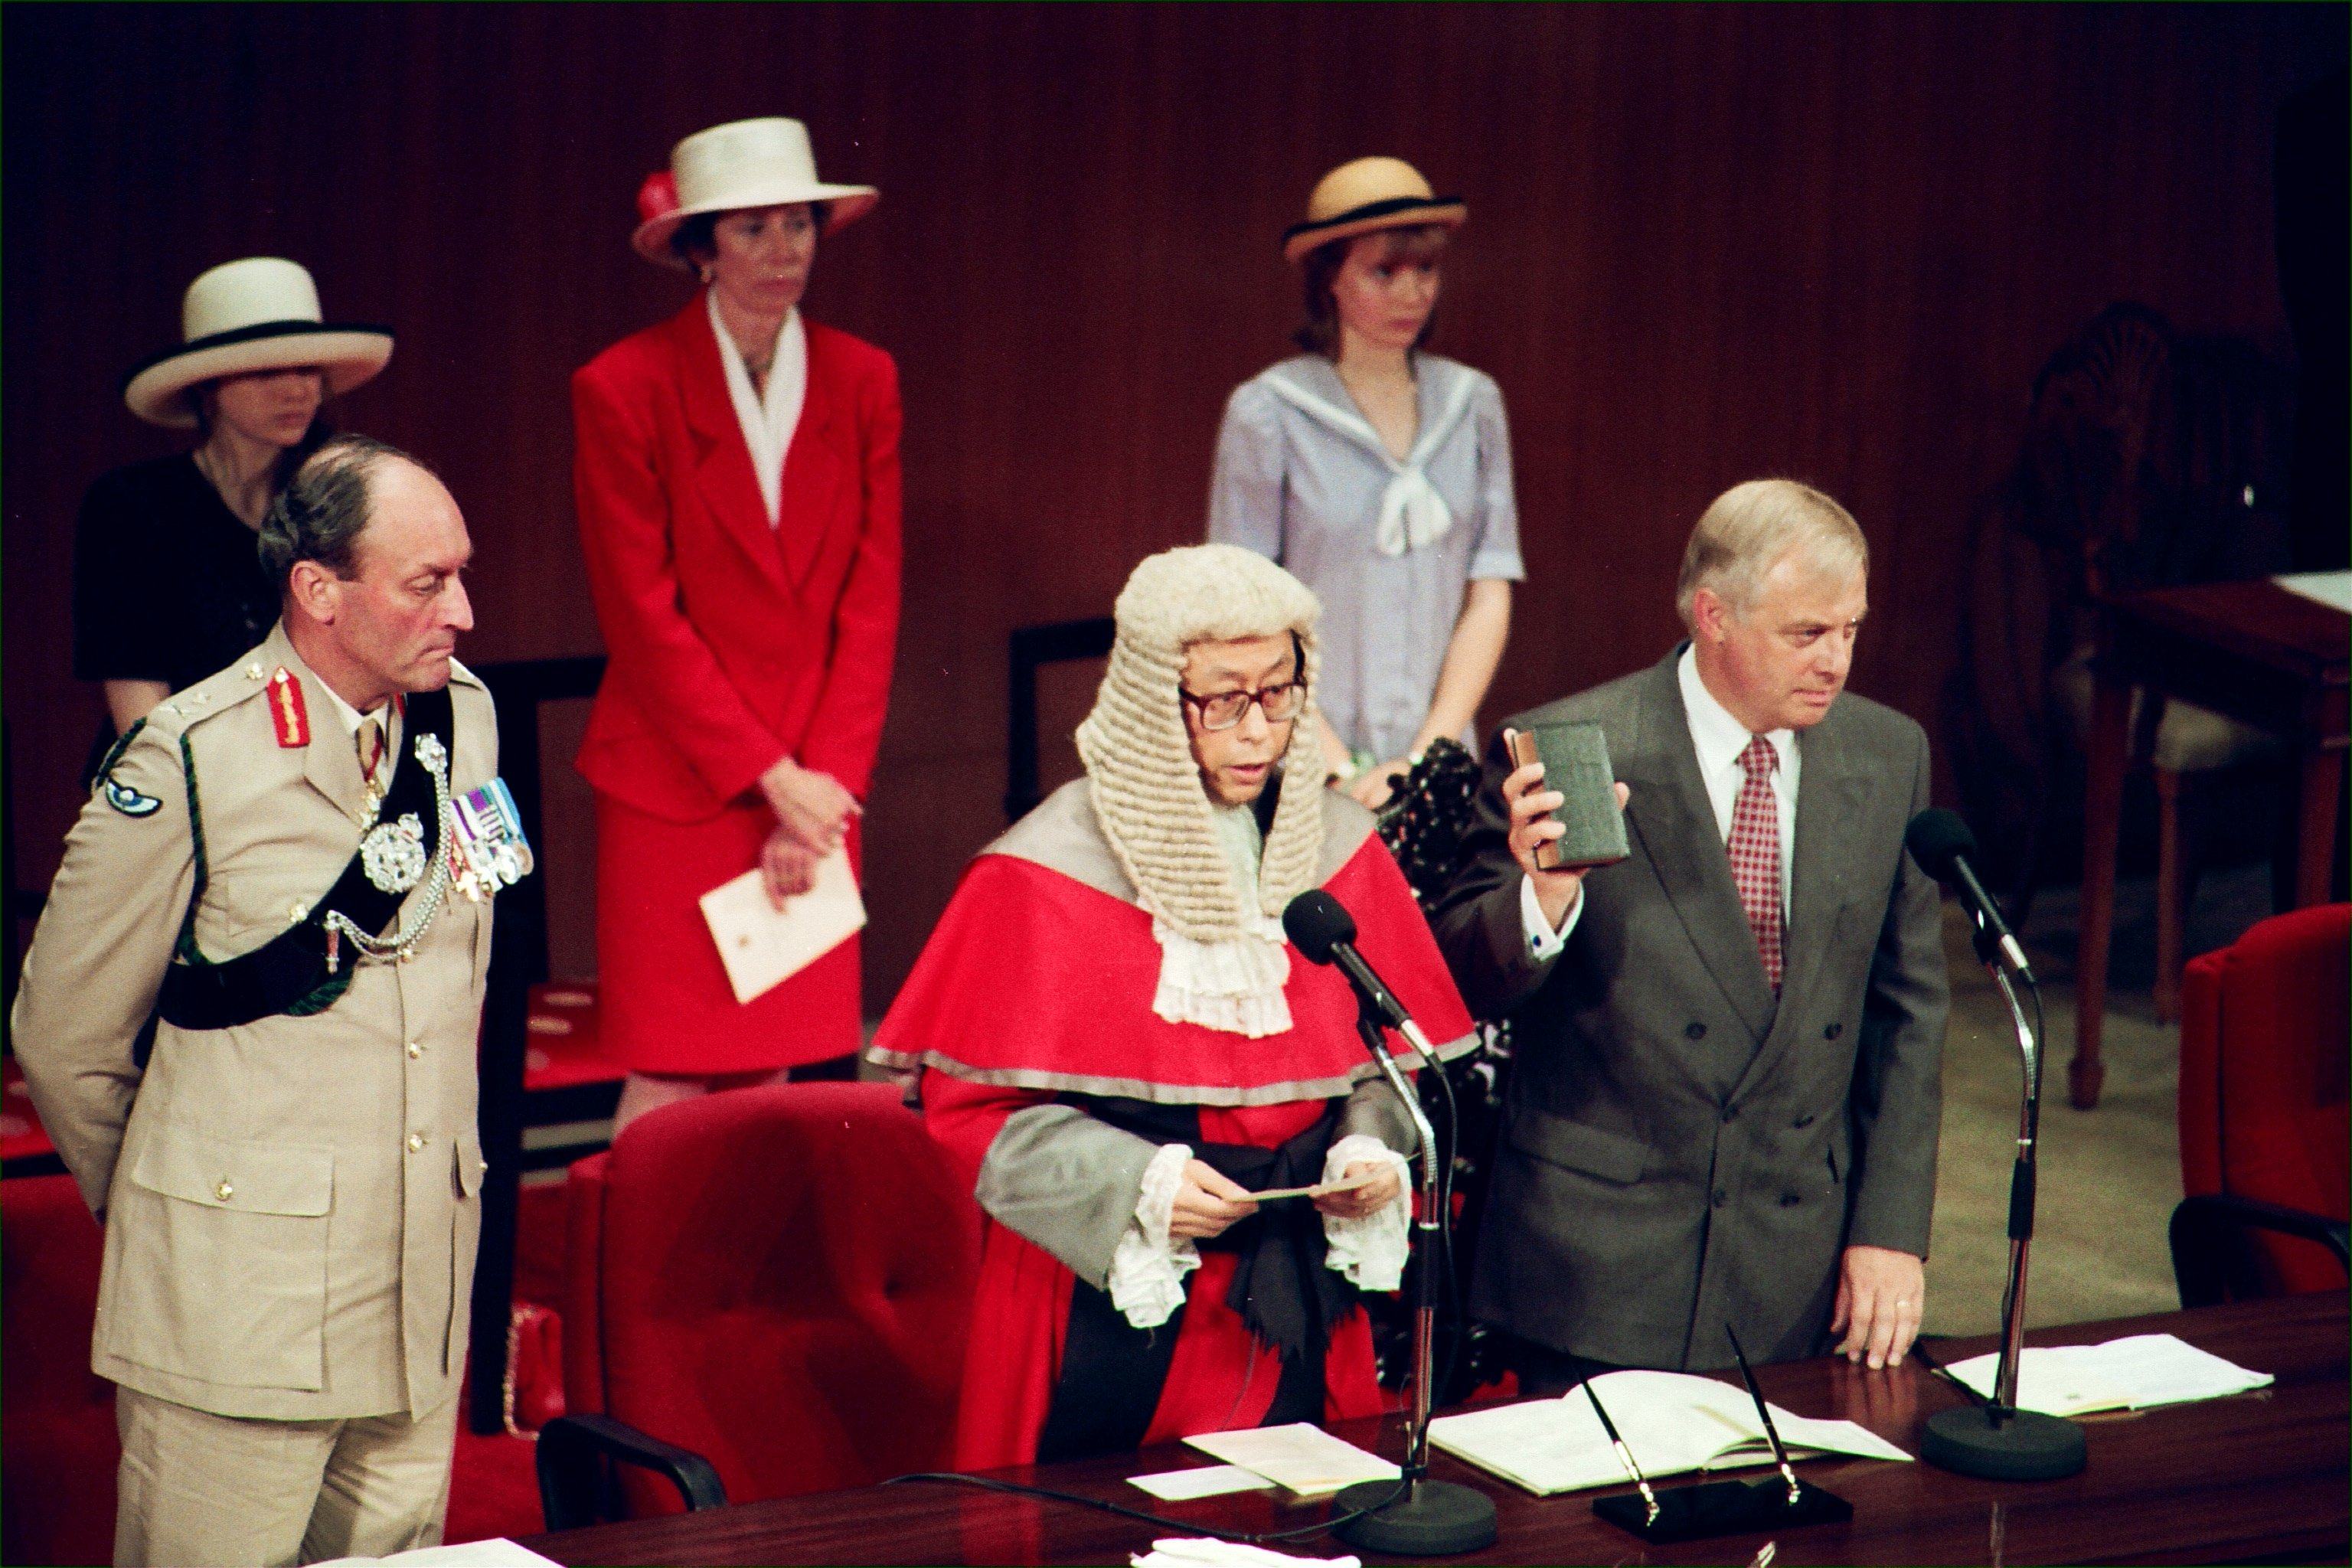 Yang as chief justice presides over the swearing-in ceremony of Hong Kong’s last governor Chris Patten (front right) in 1992. Photo: SCMP